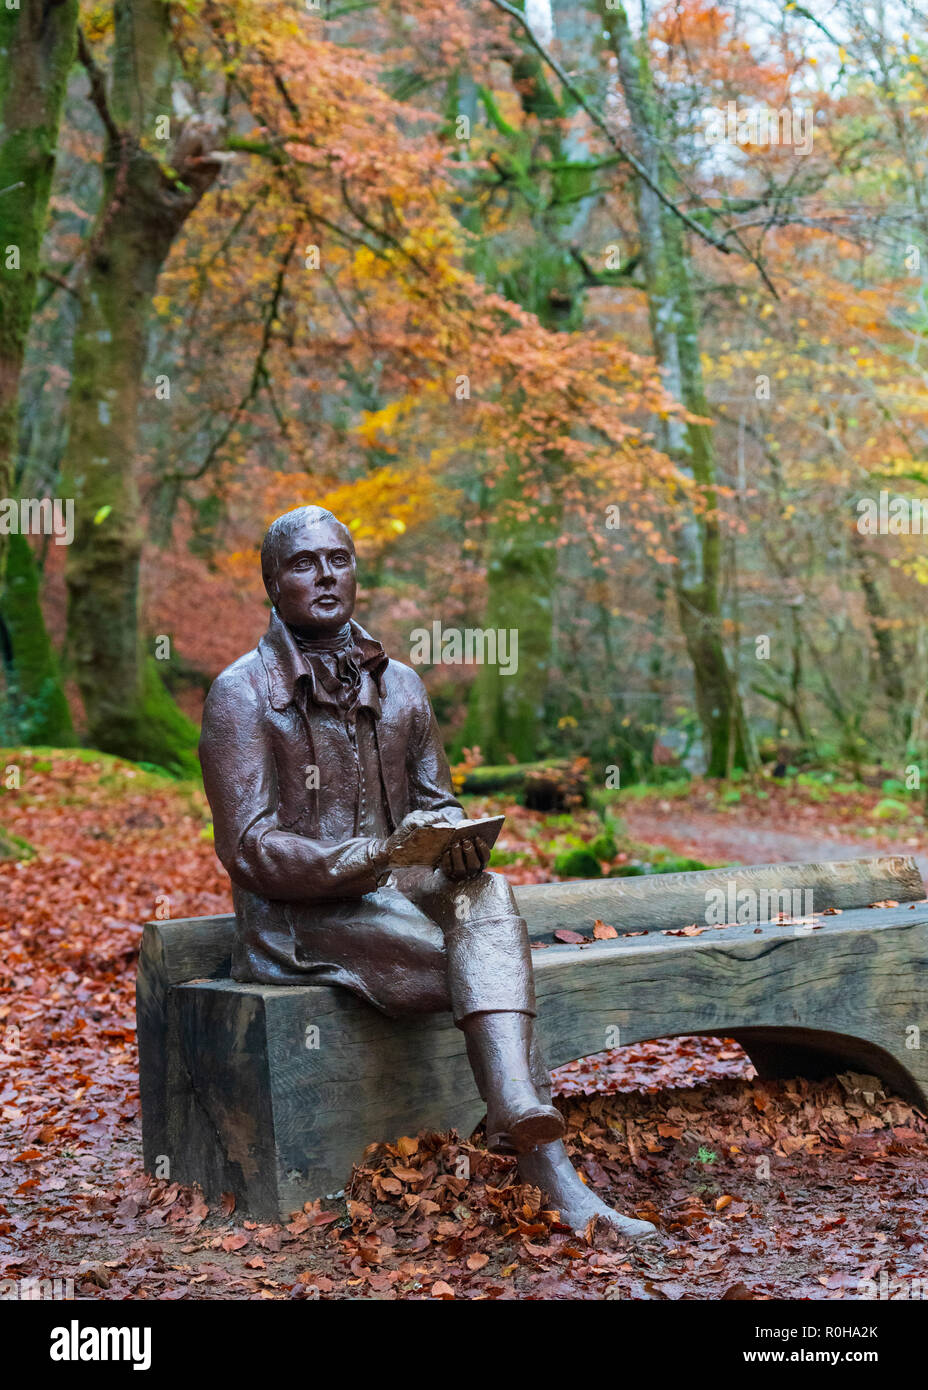 Statue of poet  Robert Burns sits on bench during autumn at the Birks O'Aberfeldy scenic area in Aberfeldy, Perthshire, Scotland,UK Stock Photo